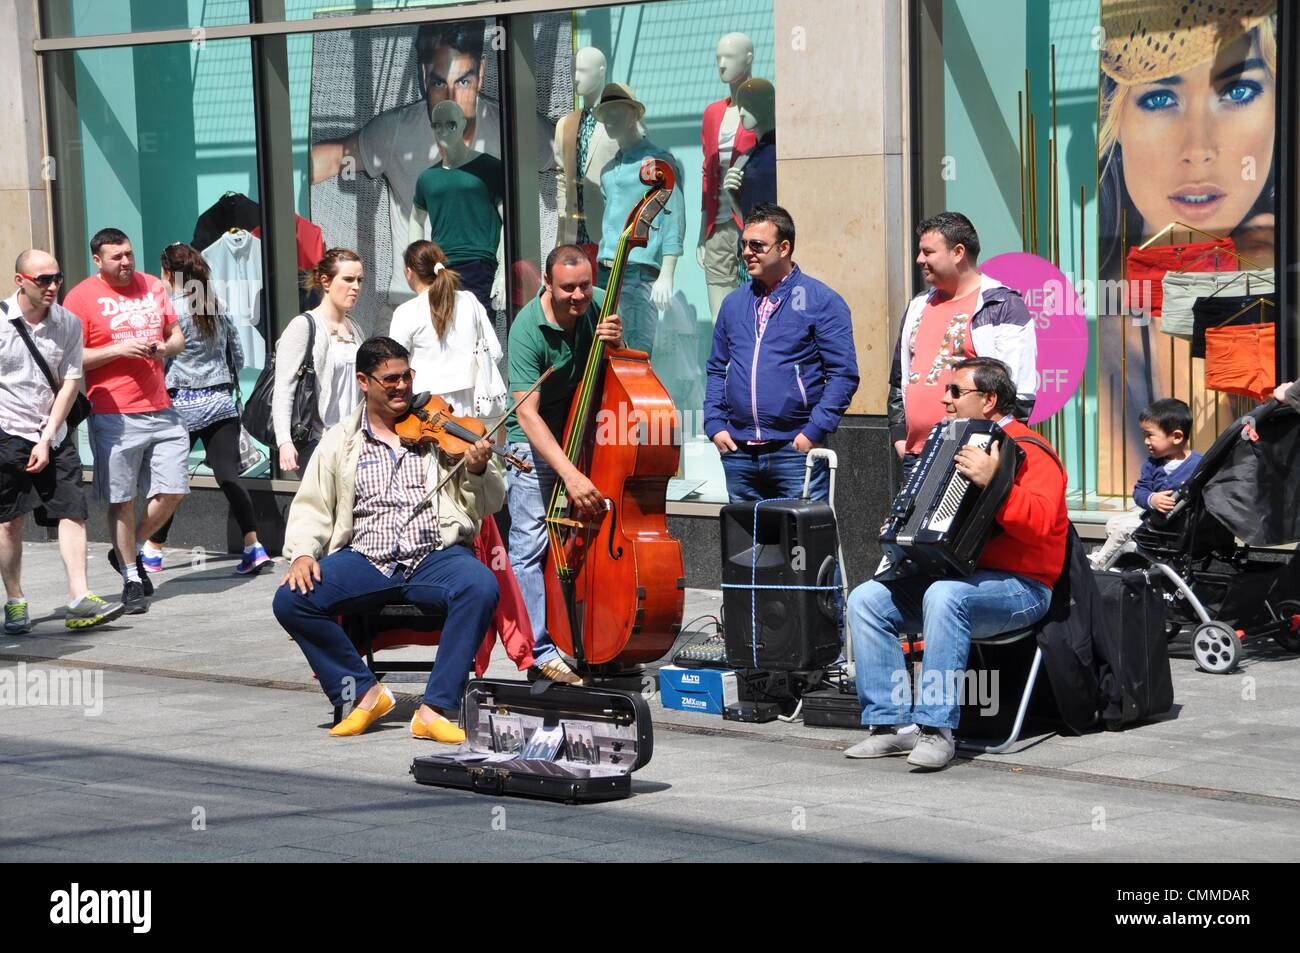 Irish music in the street: Three men play Irish folk music in Mary Street in downtown Dublin, photo taken June 4, 2013. Only few passers-by appreciate the efforts of the small band by some coins. Photo: Frank Baumgart Stock Photo